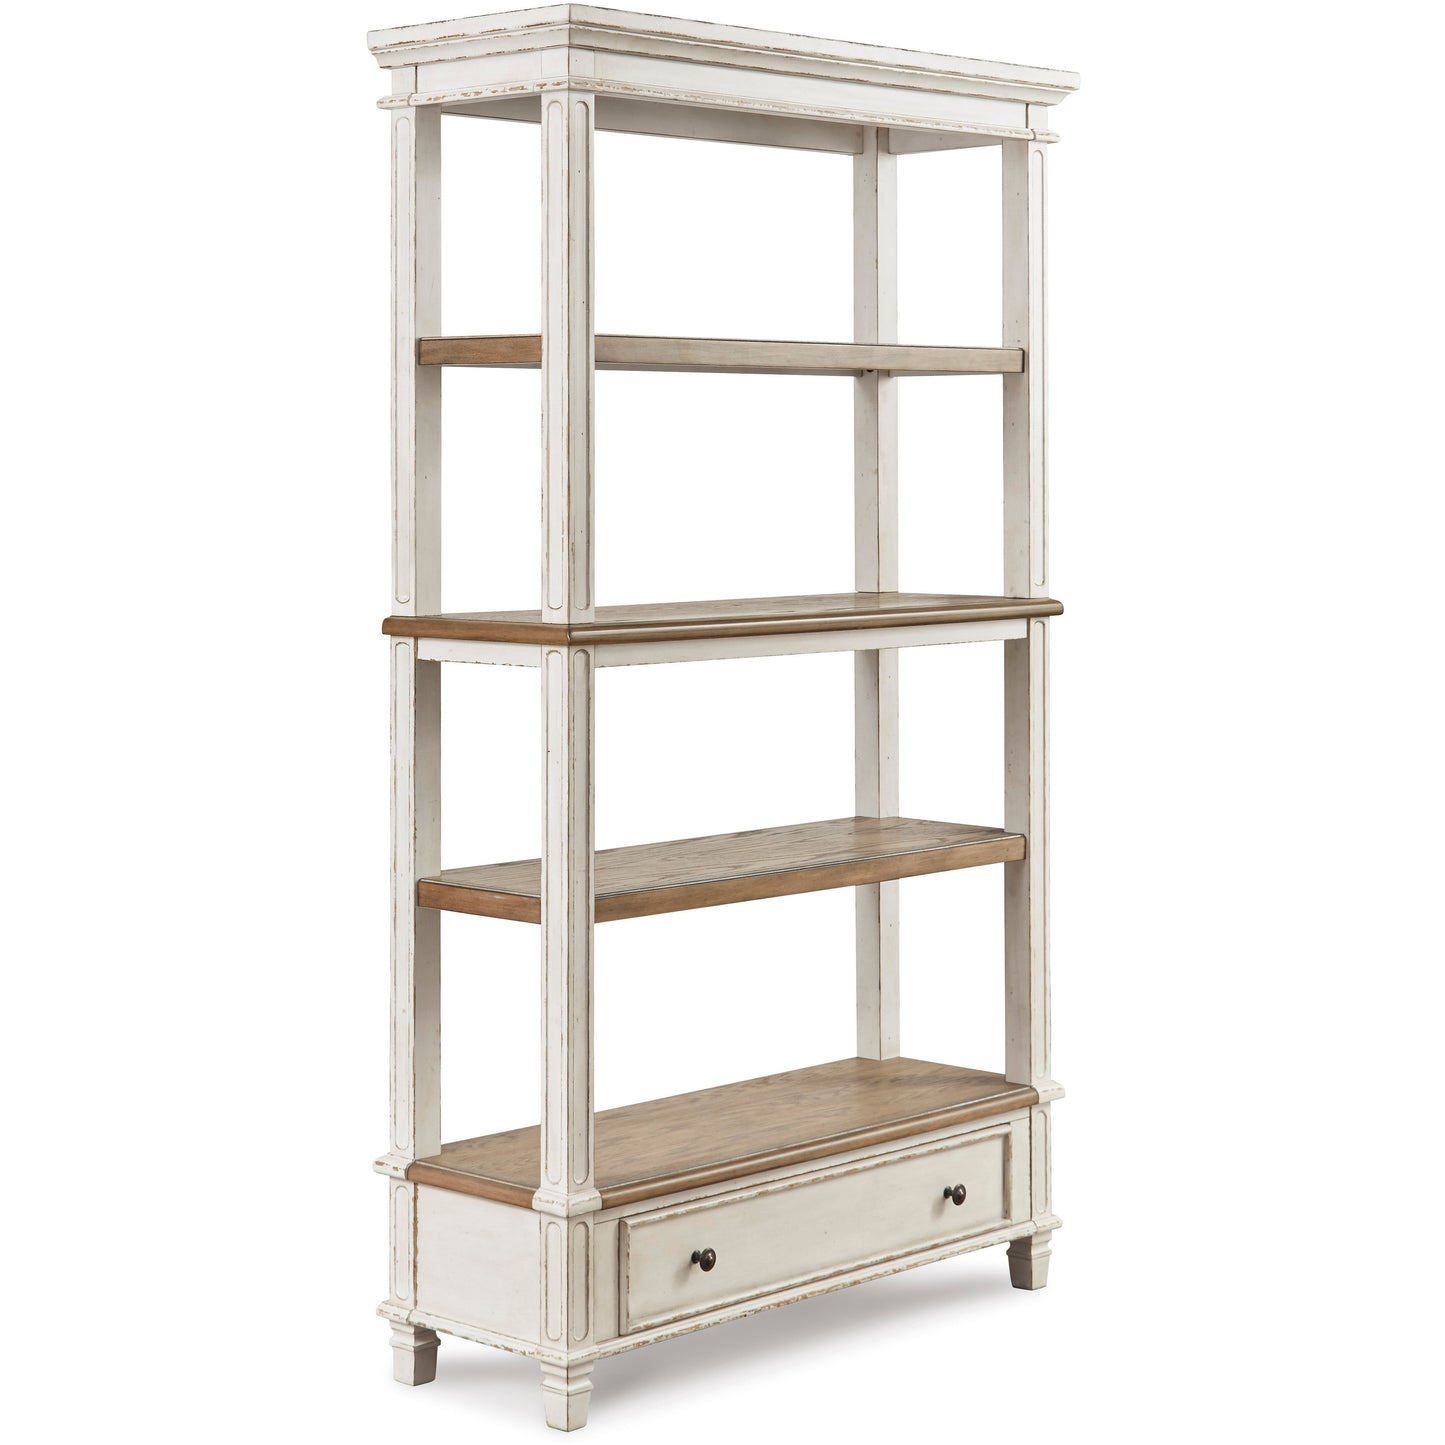 REALYN 75" BOOKCASE -  BROWN/WHITE